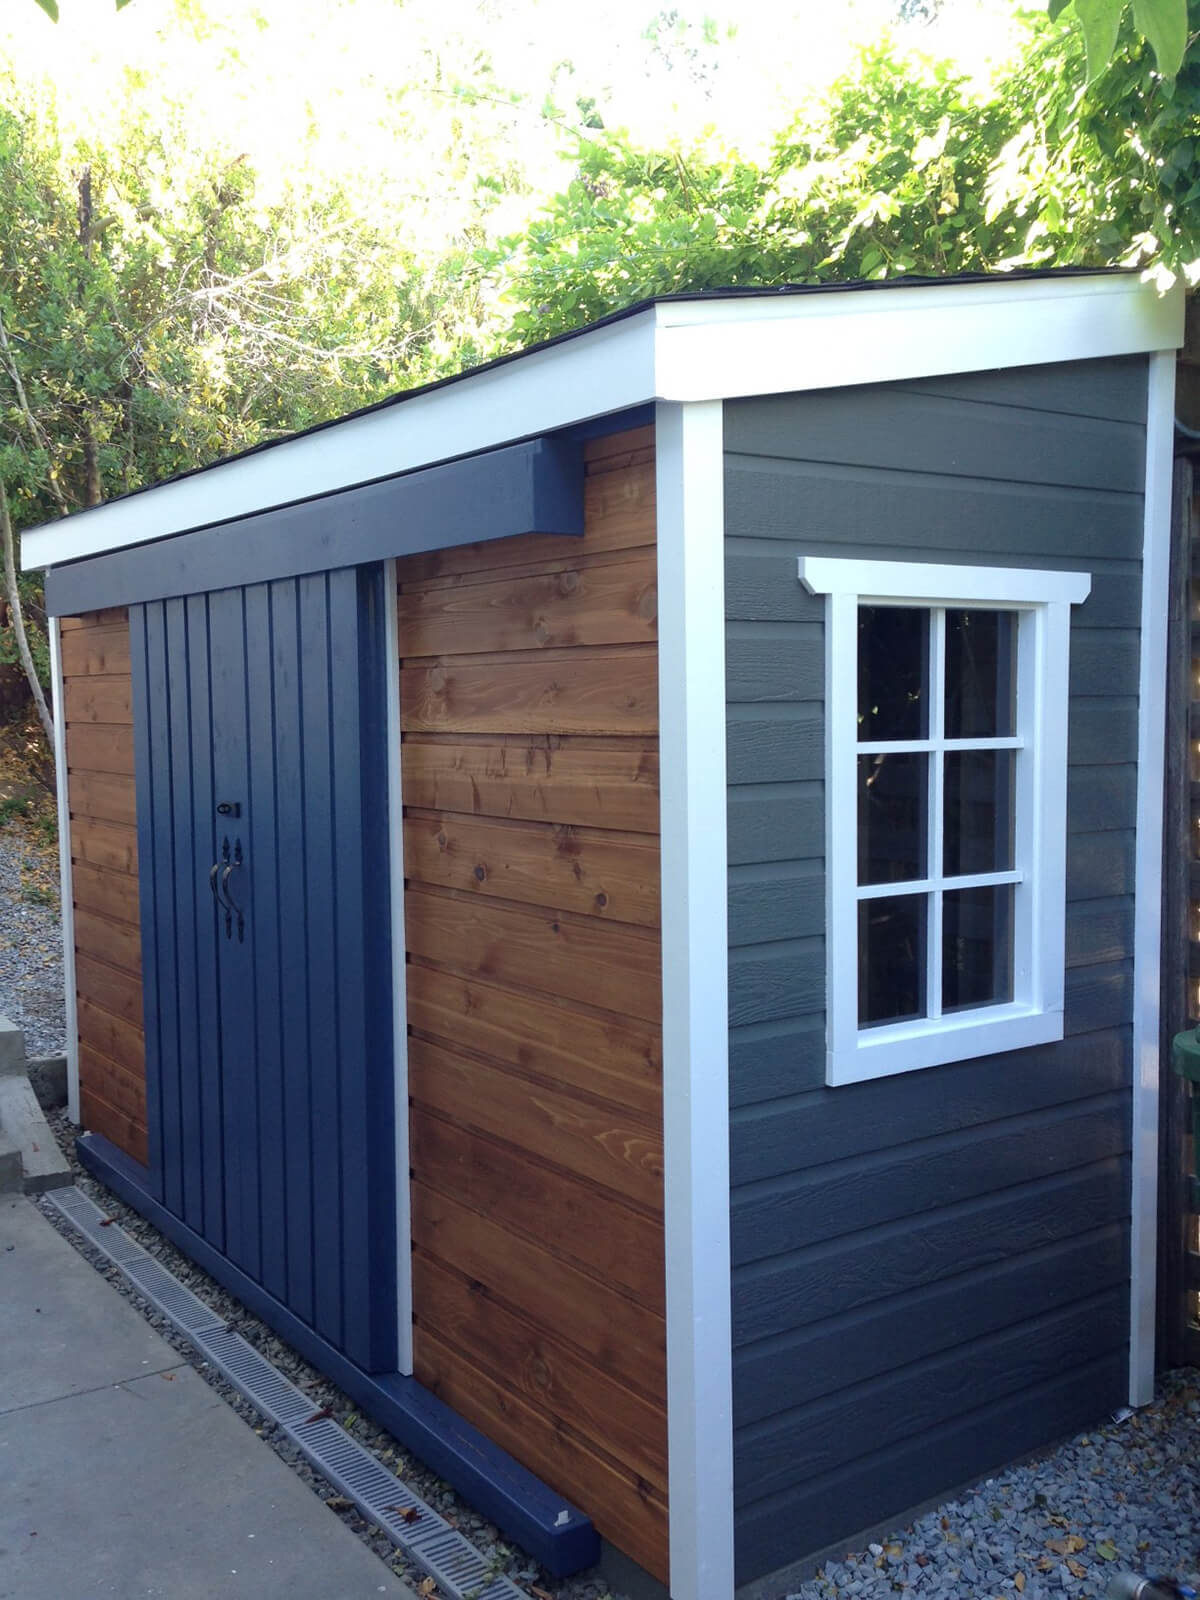 Small Corner Garden Shed